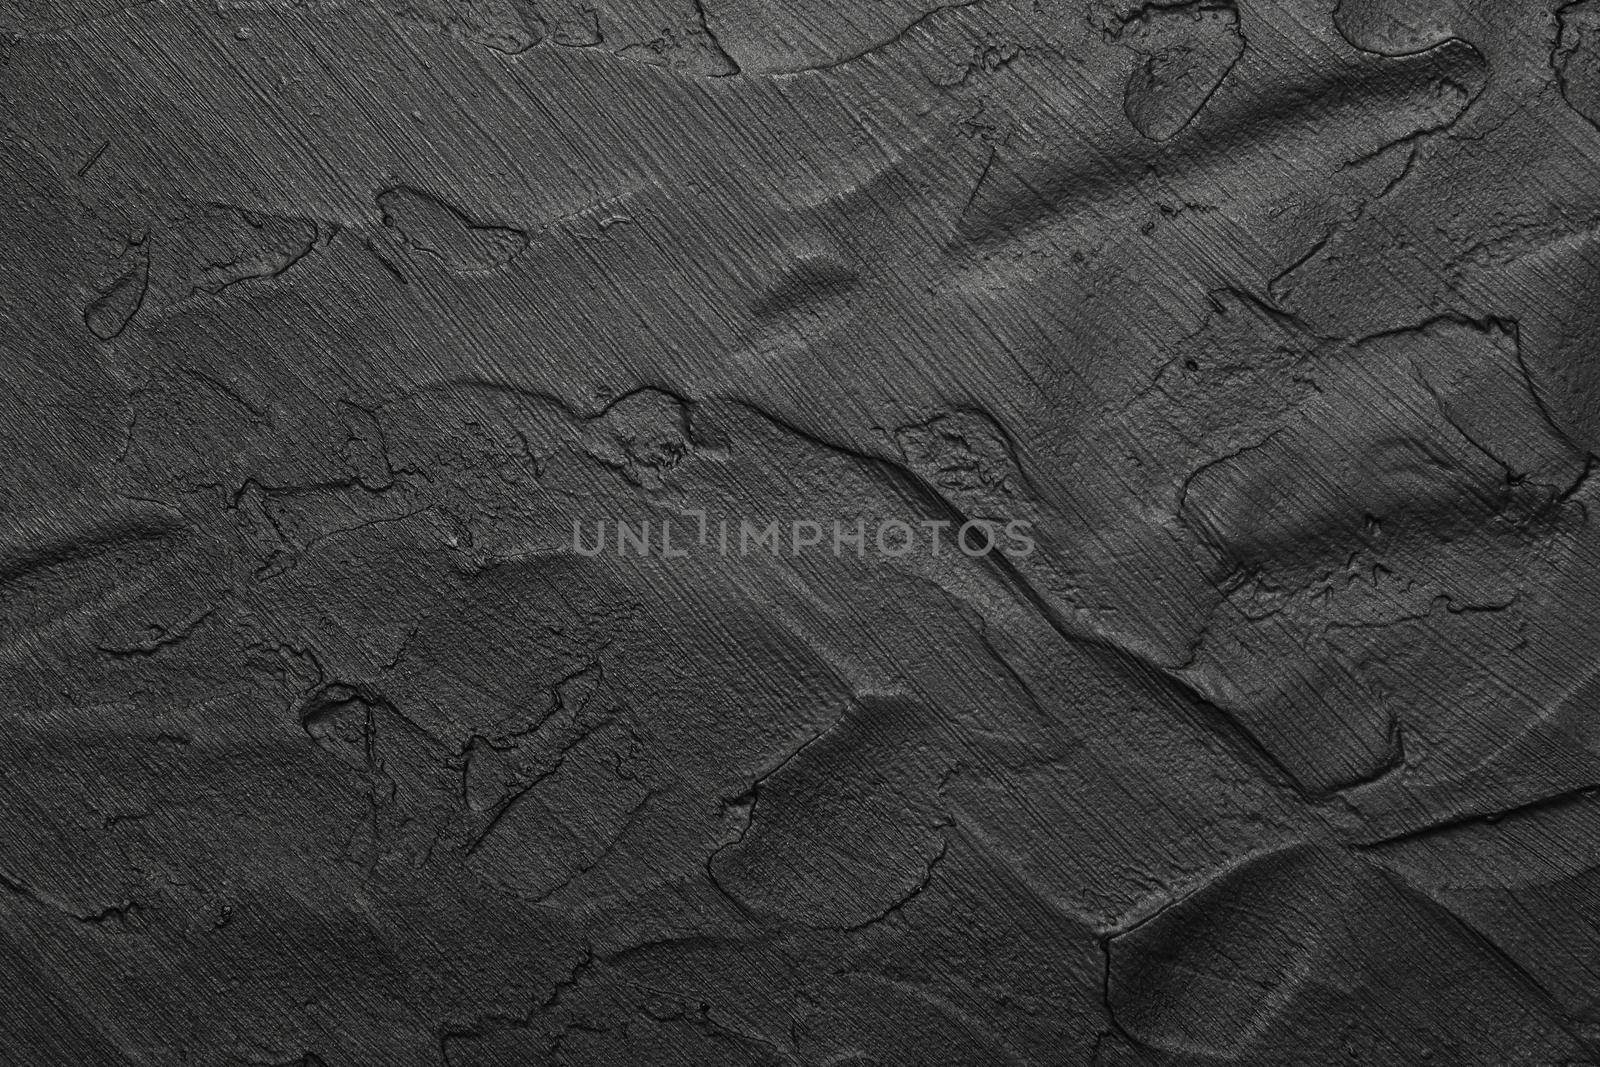 Black uneven grunge surface abstract background by BreakingTheWalls